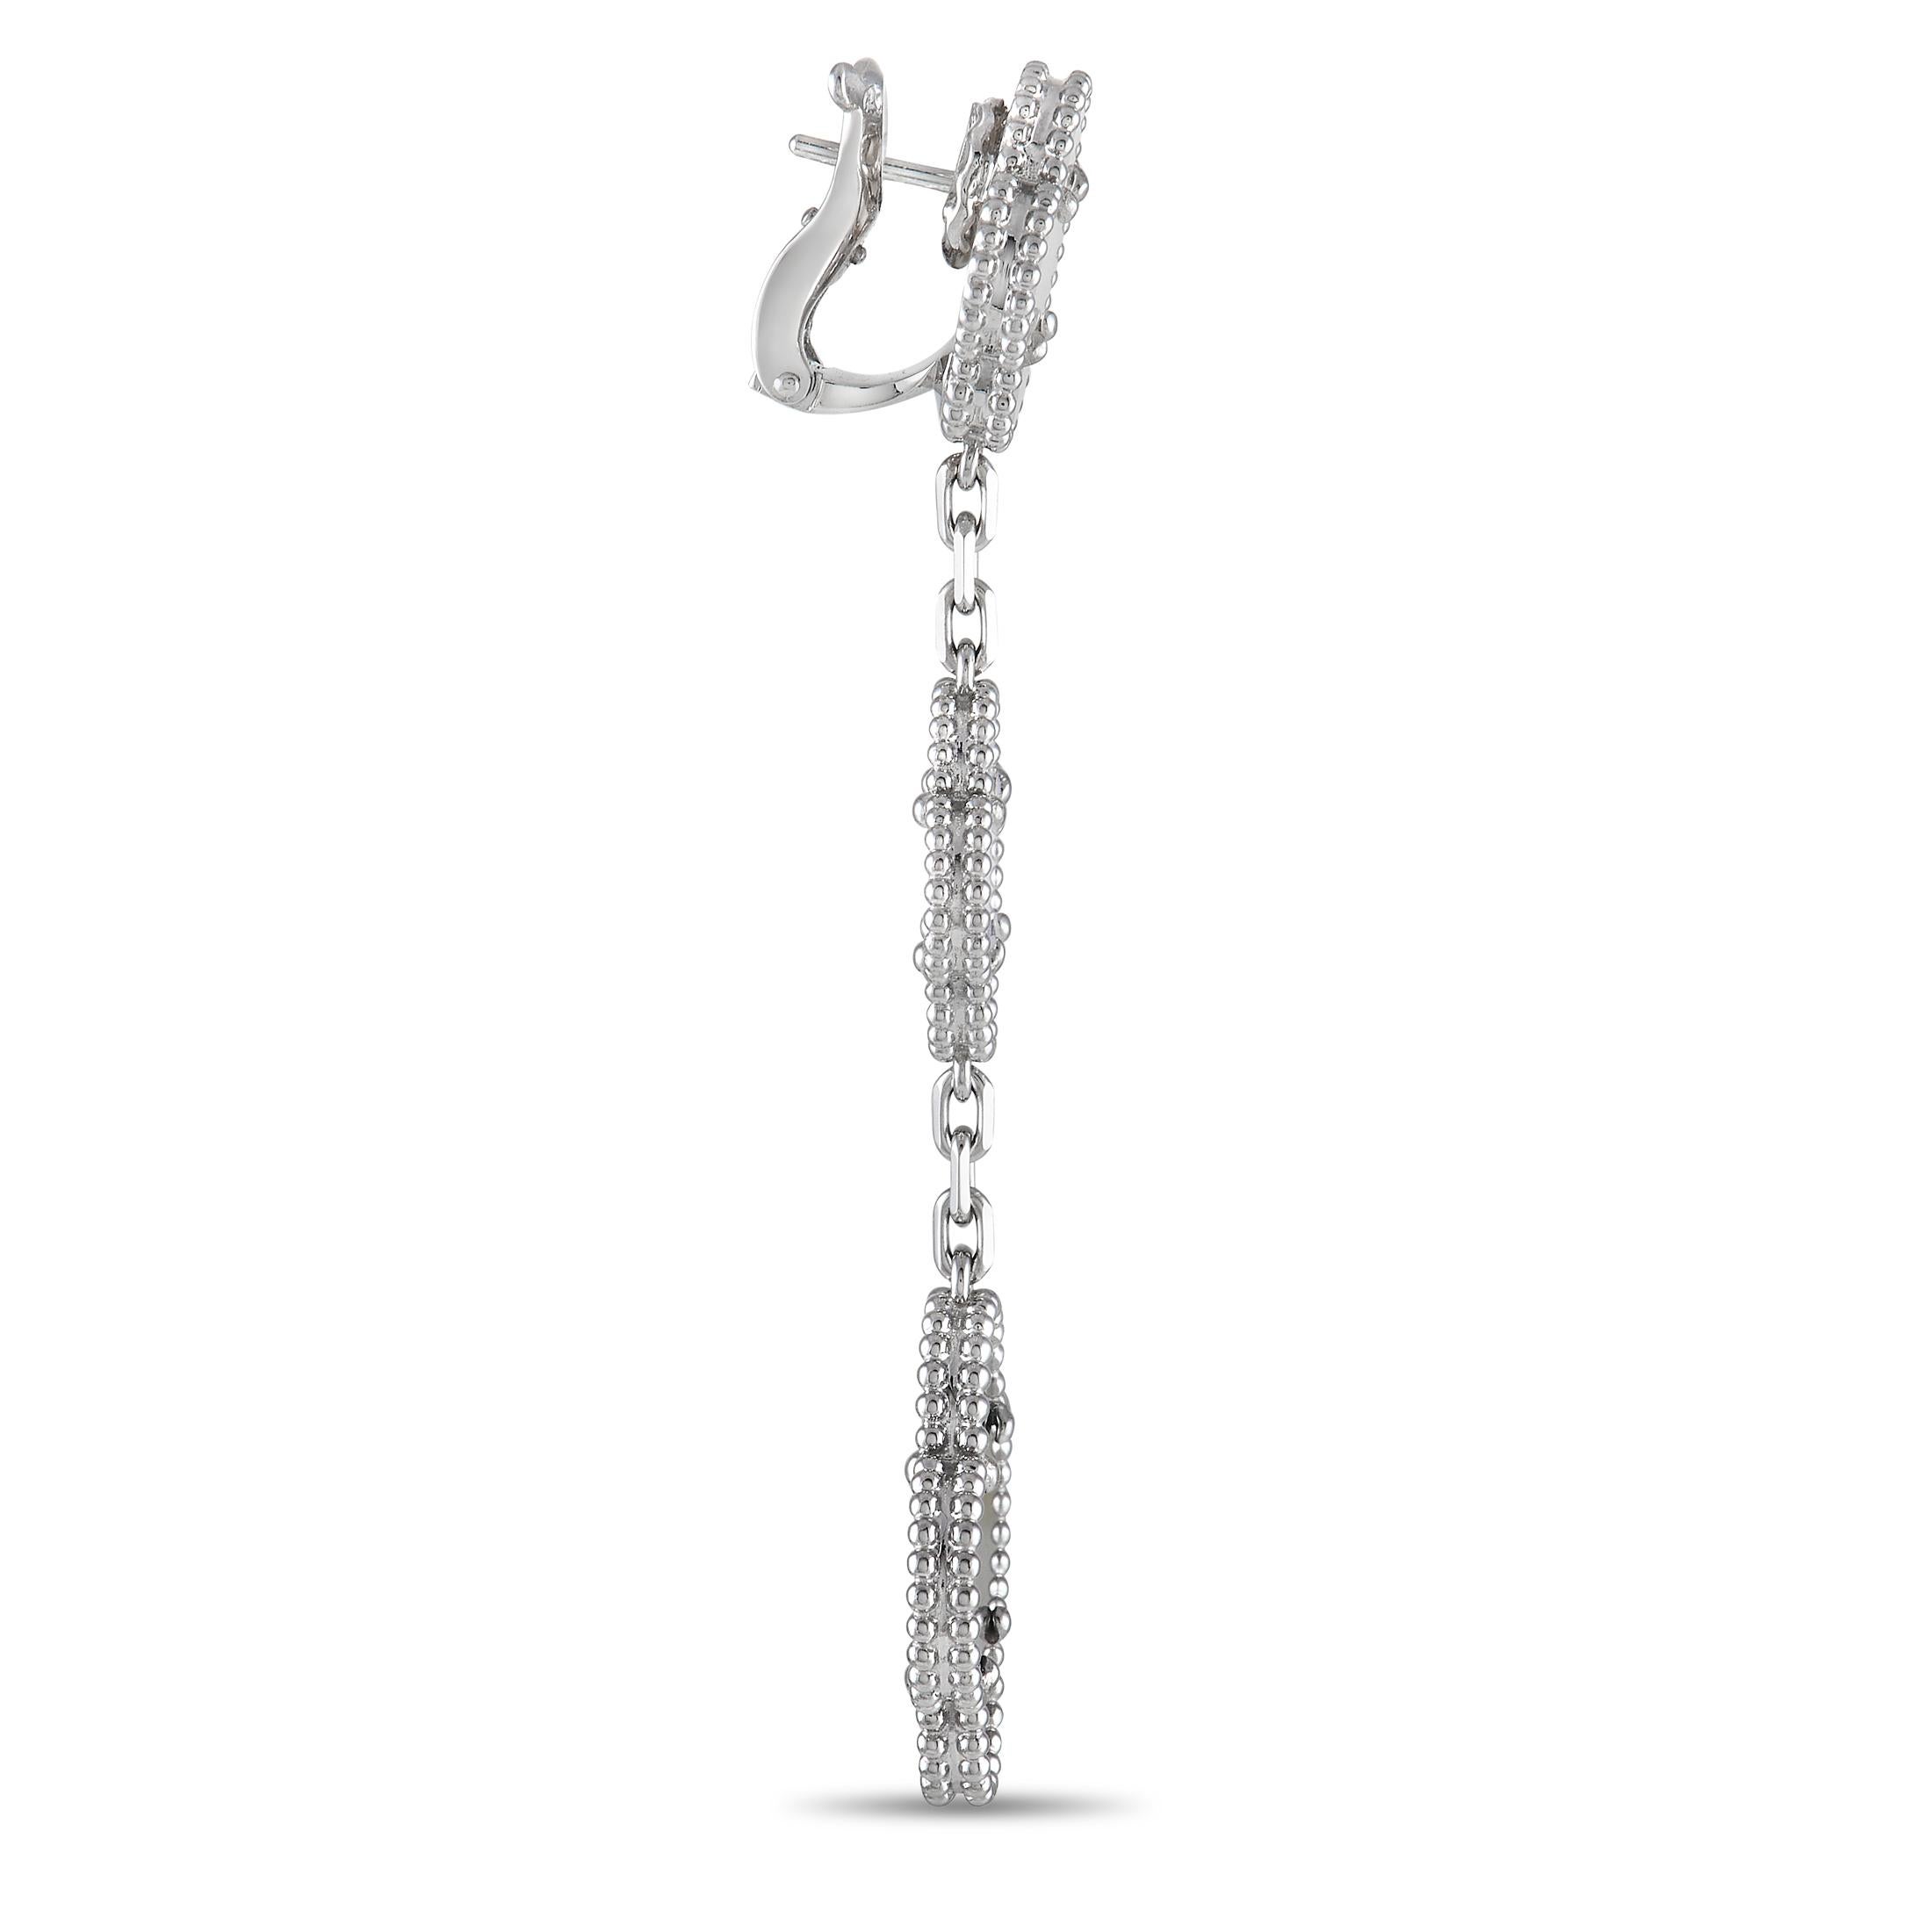 A mélange of luxurious materials come together to create these dynamic Van Cleef & Arpels Magic Alhambra earrings. Each one is crafted from 18K White Gold and features three iconic clover motifs accented by Grey Mother of Pearl, White Mother of